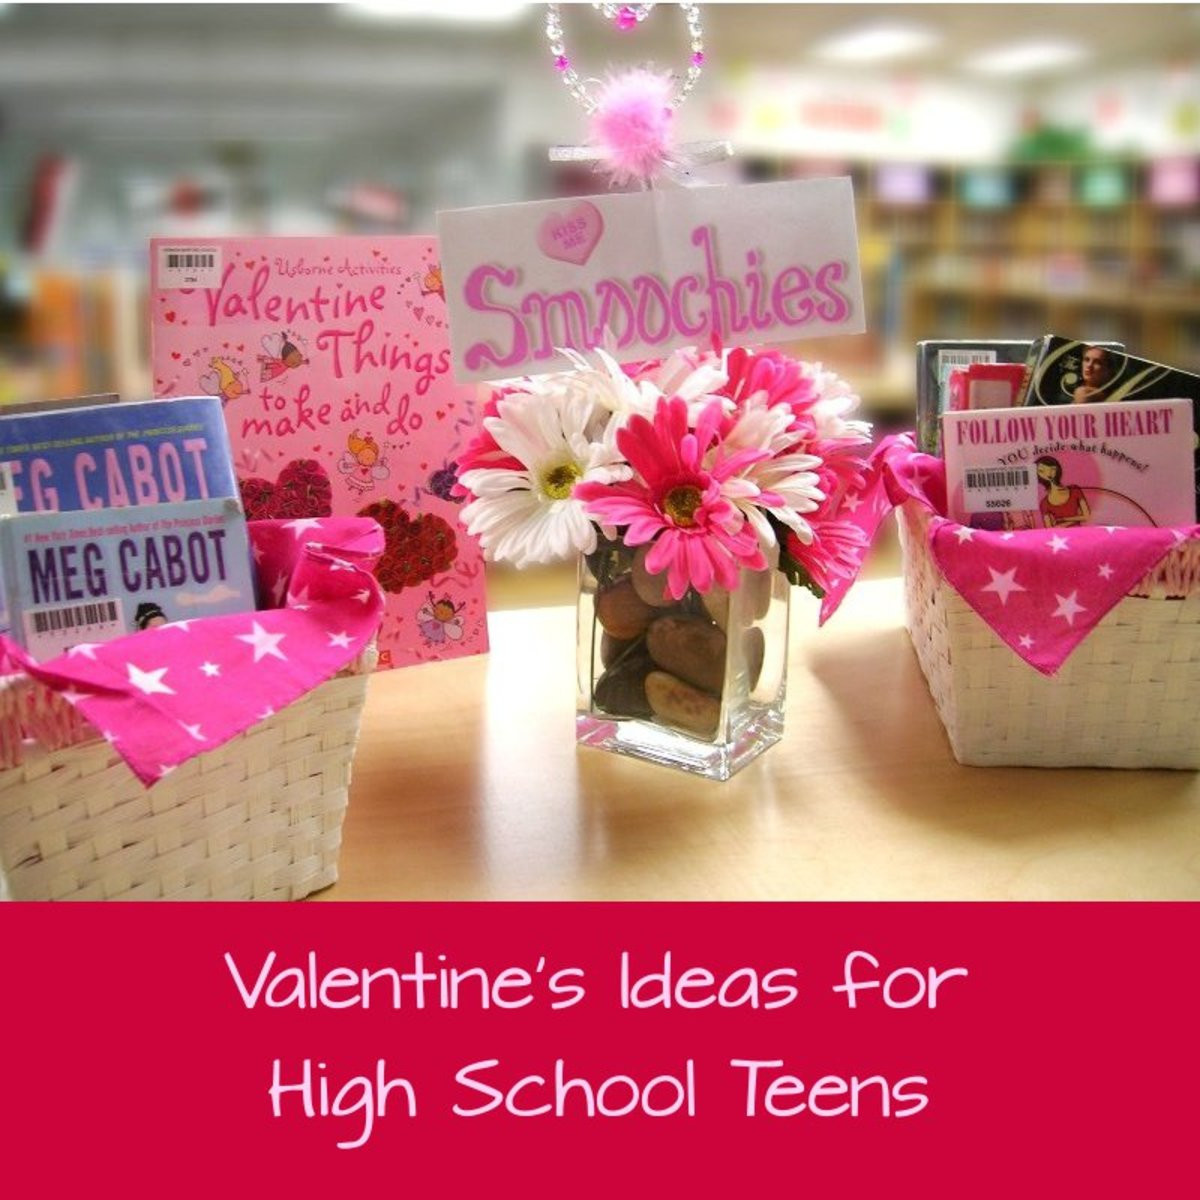 Valentines Day Gifts For Teens
 Valentine s Day Gift Ideas for High School Teens